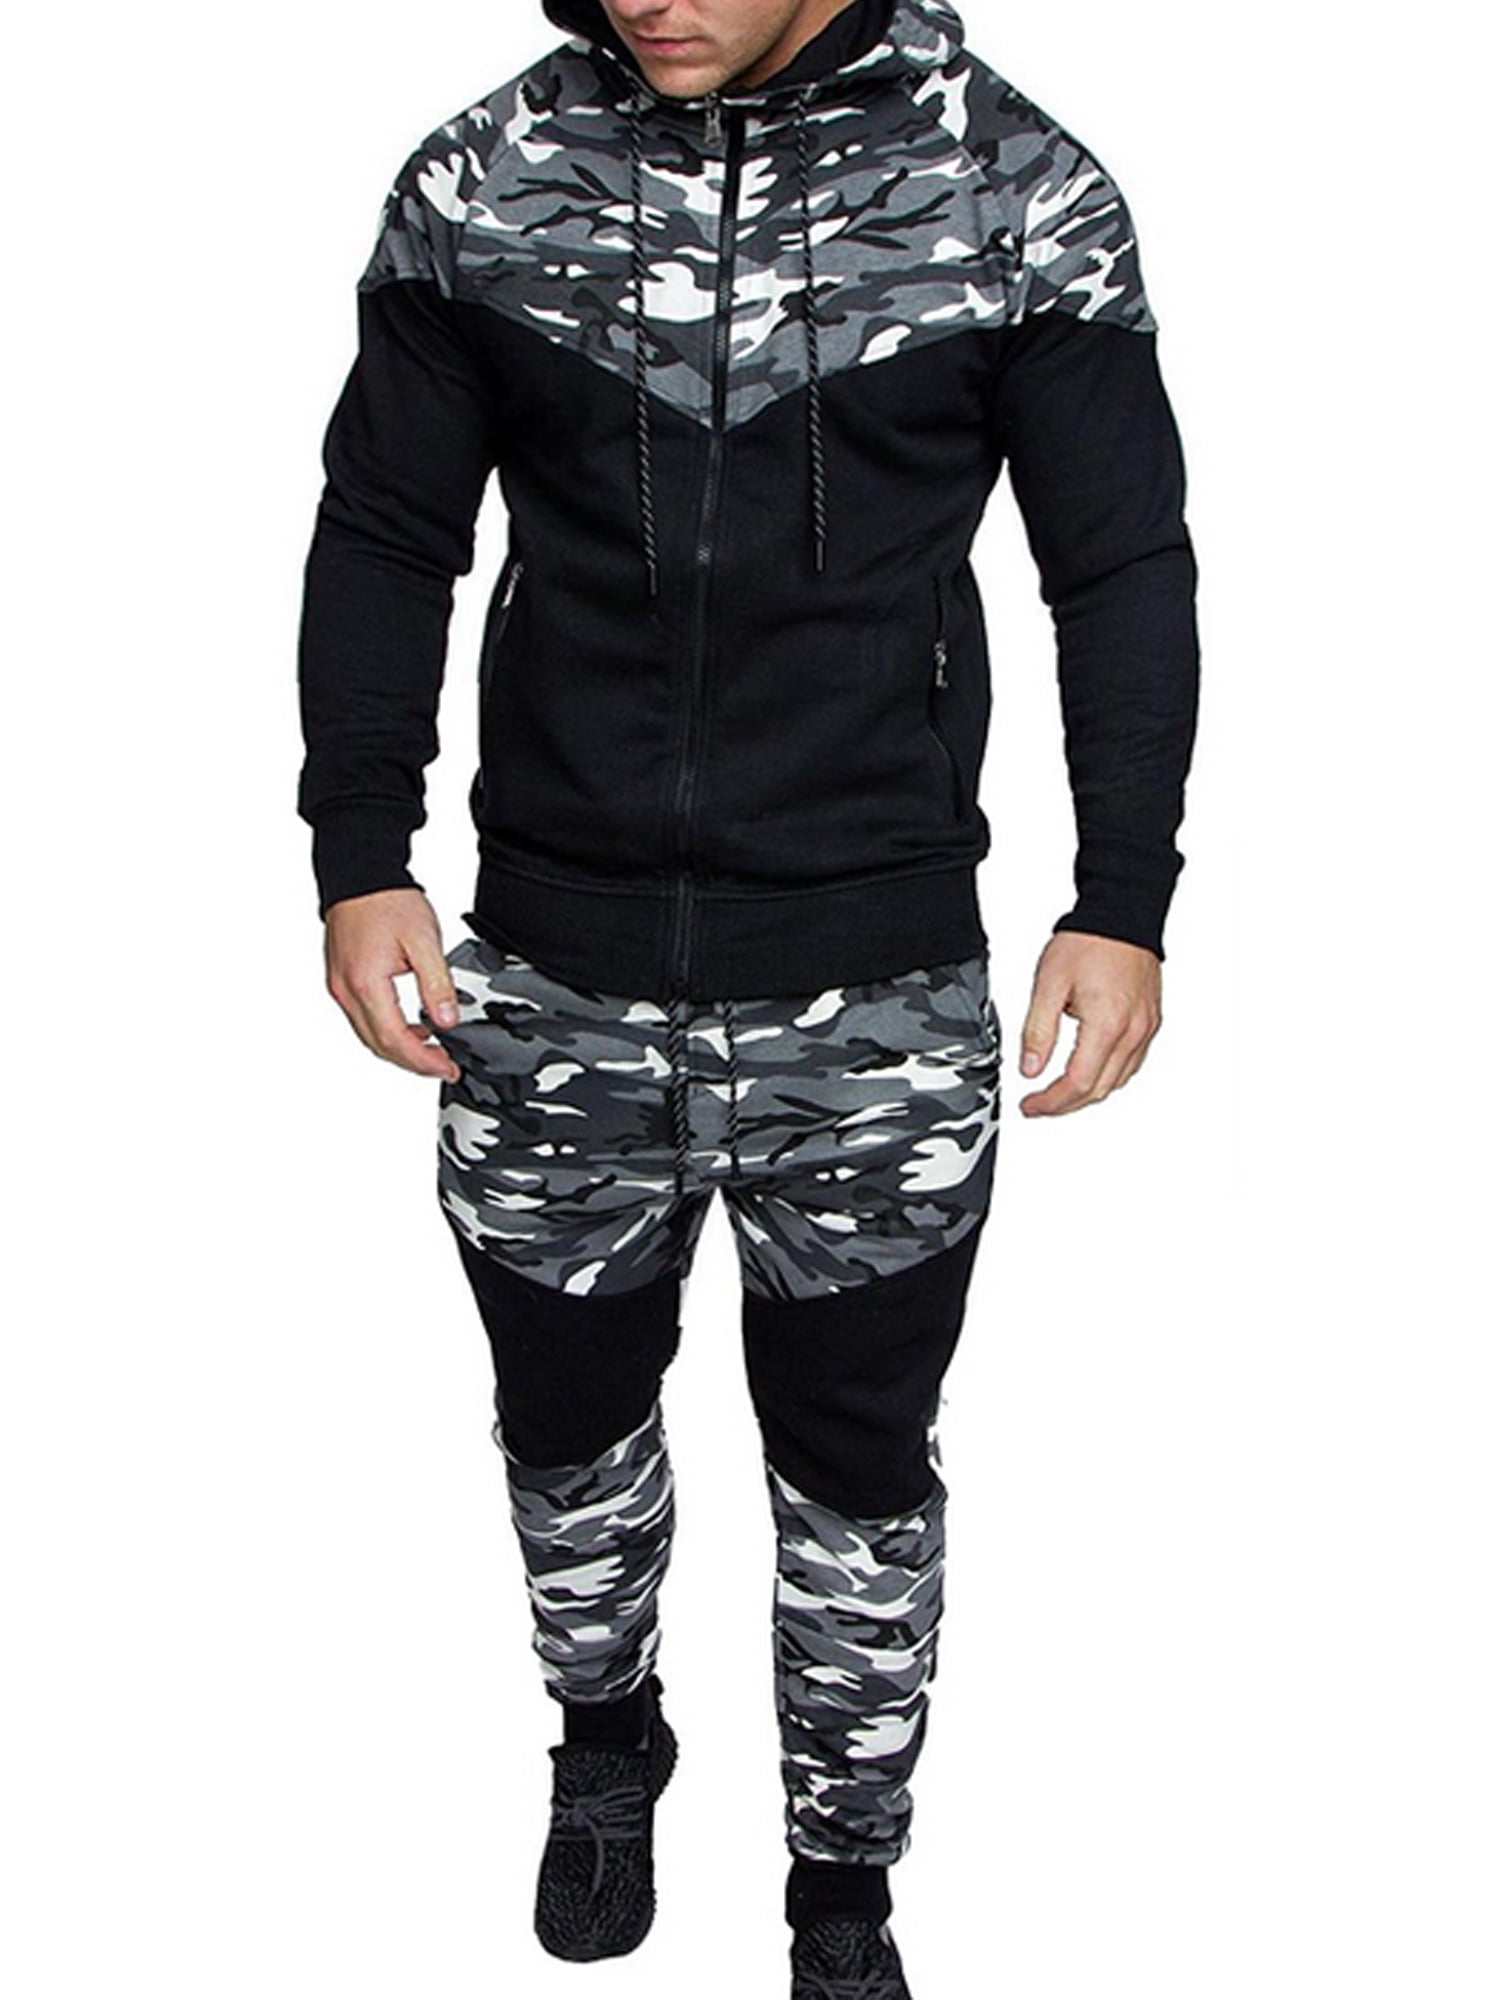 Mens Athletic Casual Pant and Hooded Jacket Sweatsuit Set 